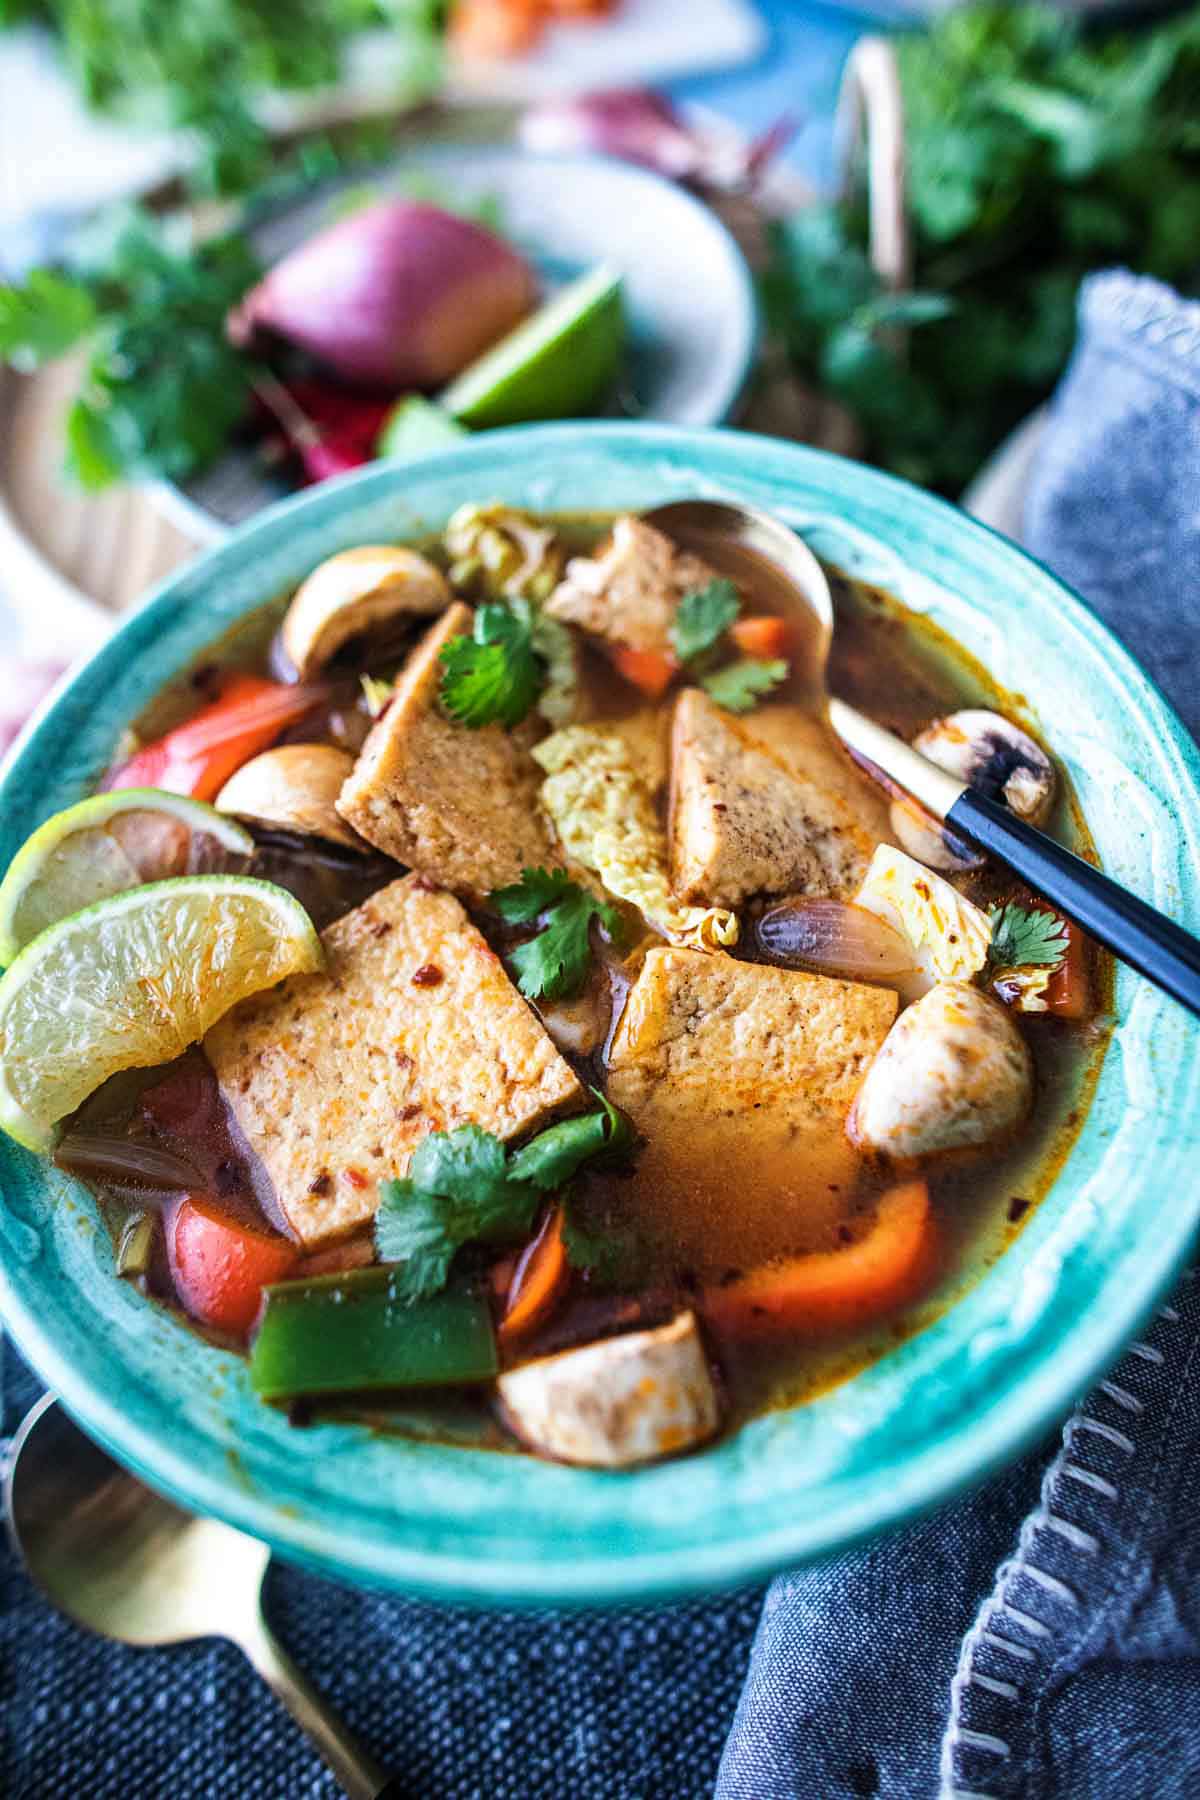 Delicious and warming, Tom Yum Soup is a classic Thai soup that is best known for its clear, sour broth infused with lemongrass and galangal. Make this vegetarian with tofu, or add shrimp or chicken! 